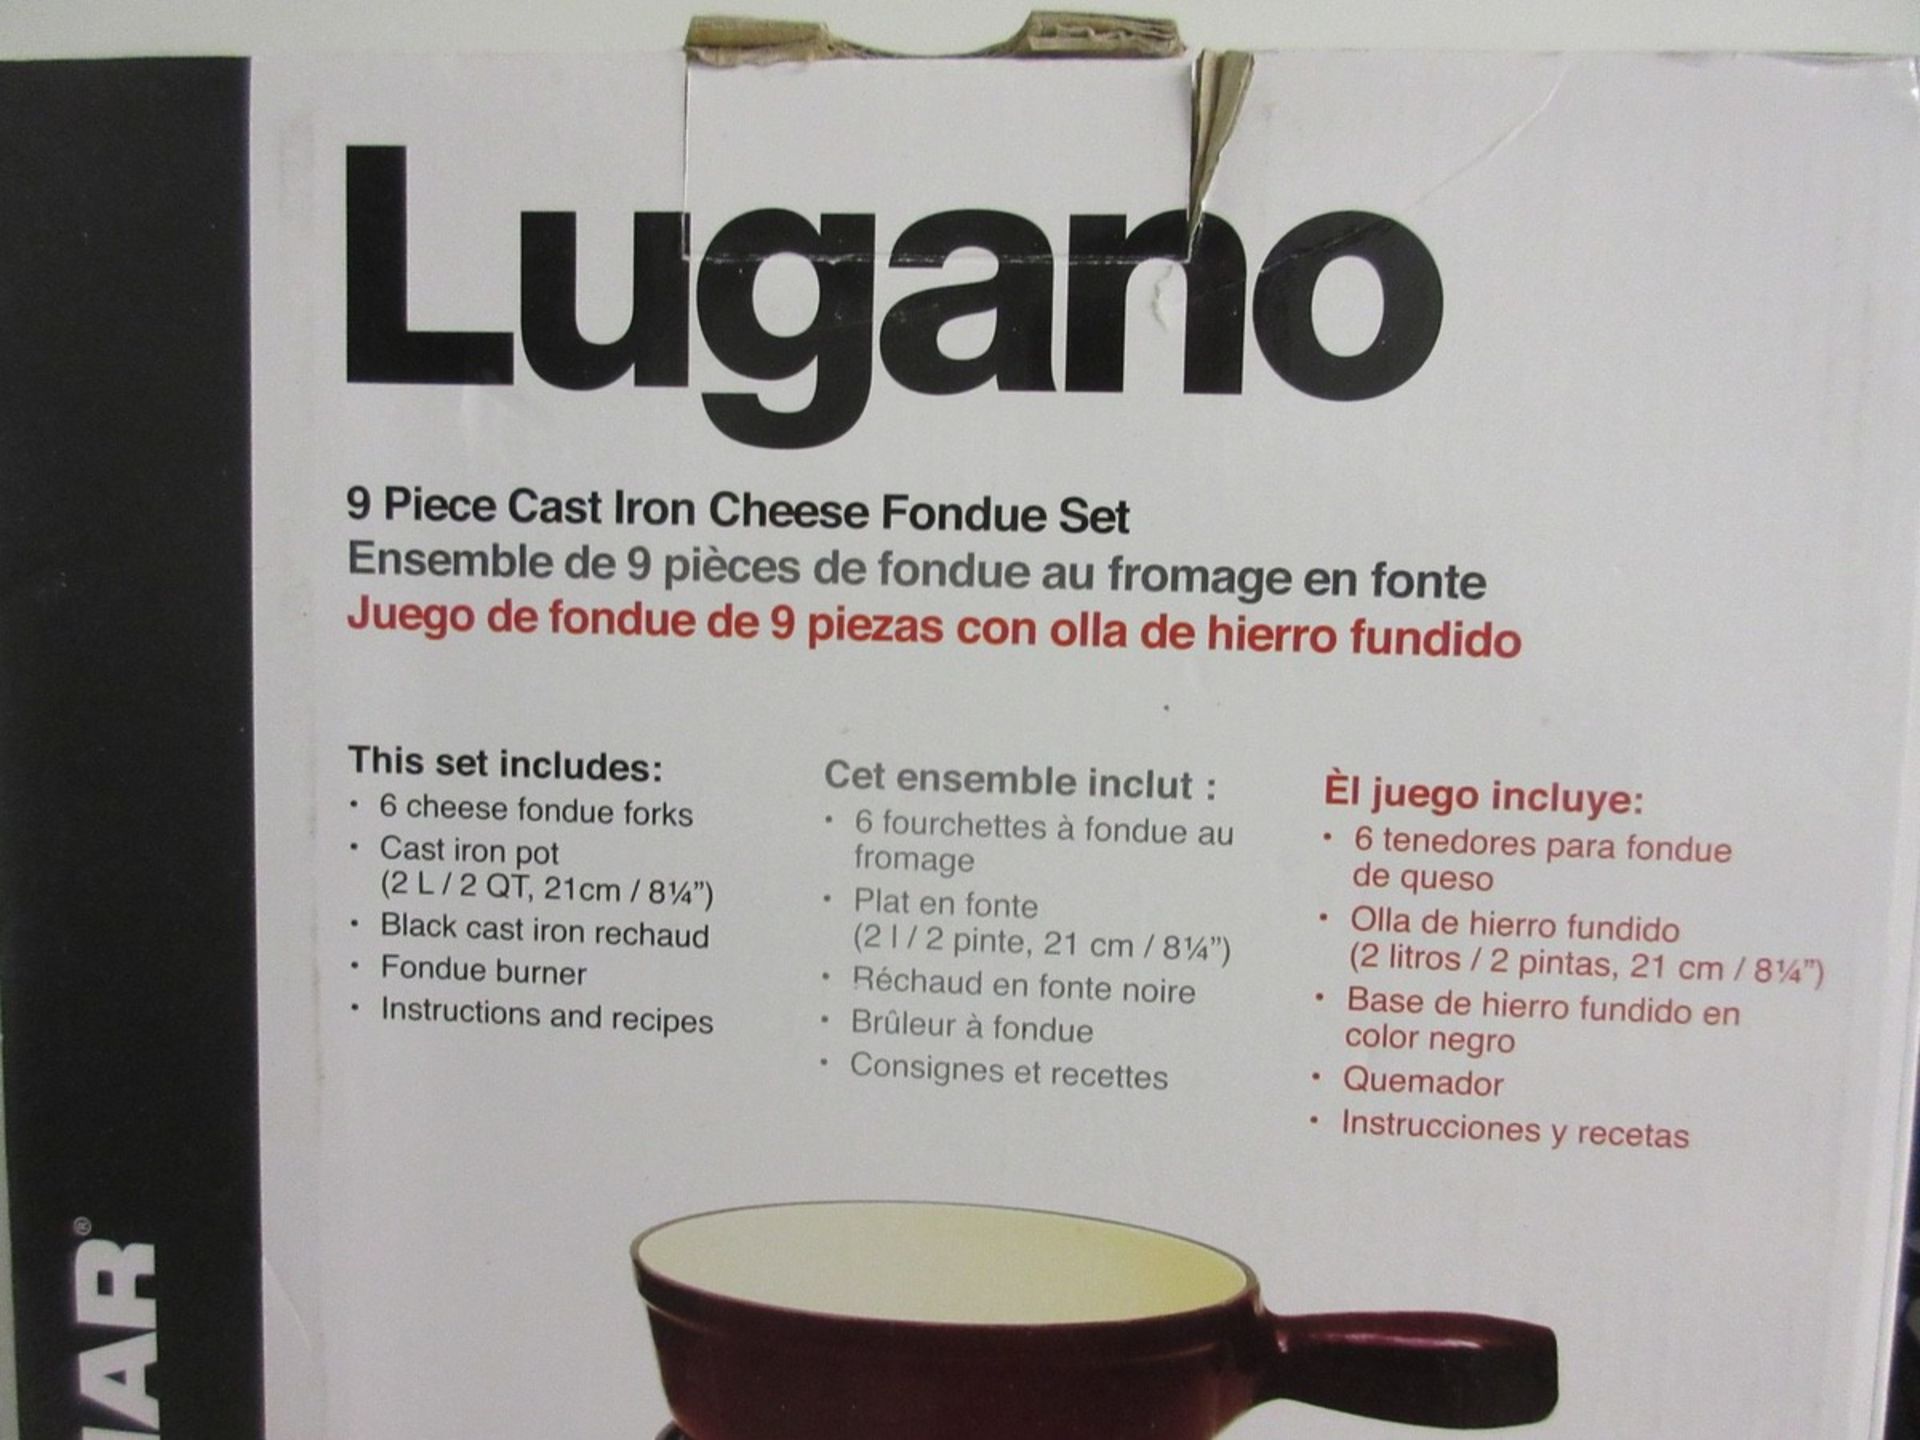 LOT (4) Lugano 9-Piece Cast Iron Cheese Fondue Sets in Boxes - Image 2 of 2